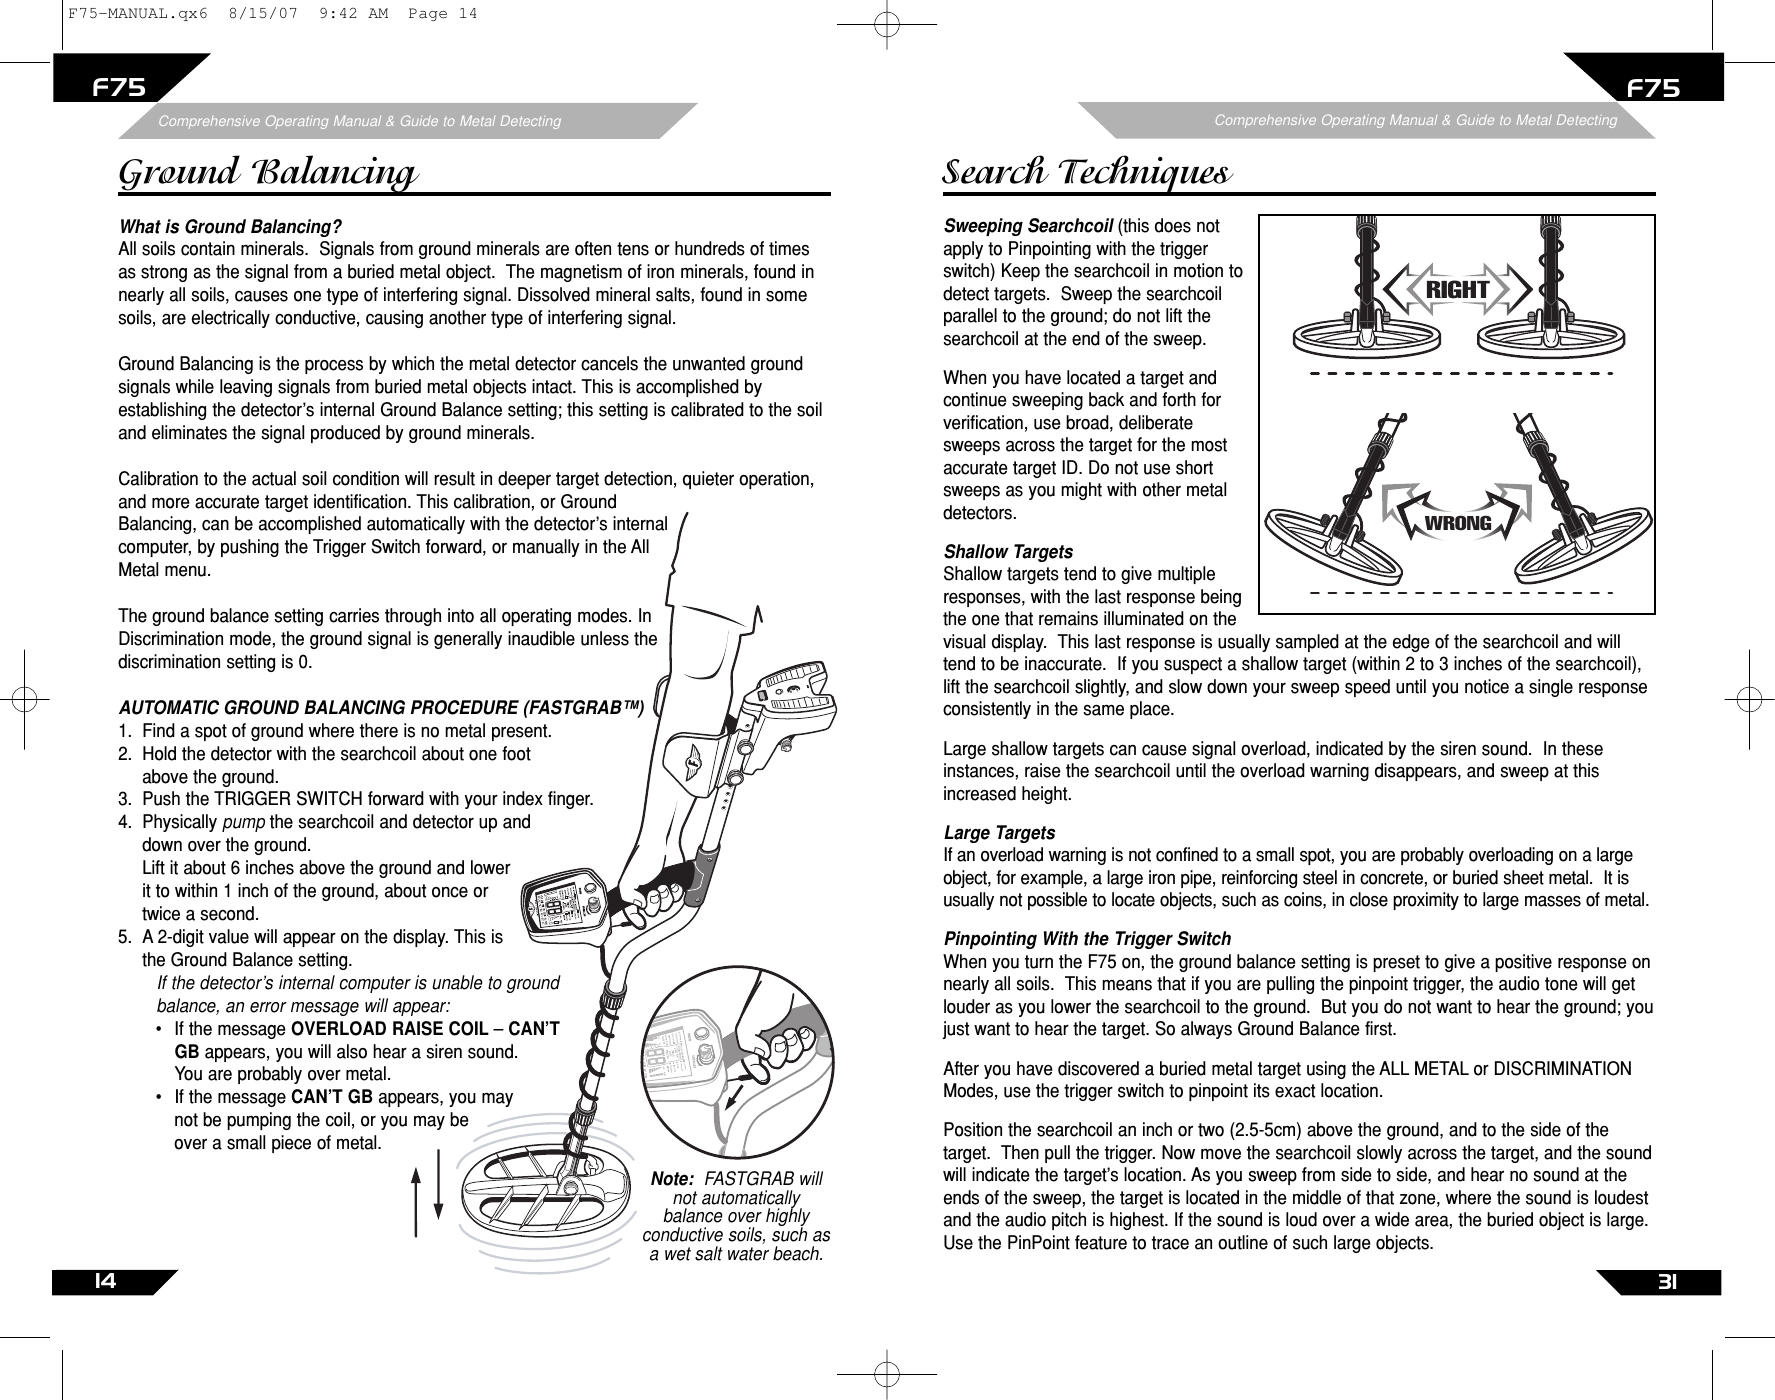 Page 31 of First Texas F75MD Hobby Metal Detector User Manual Layout 1